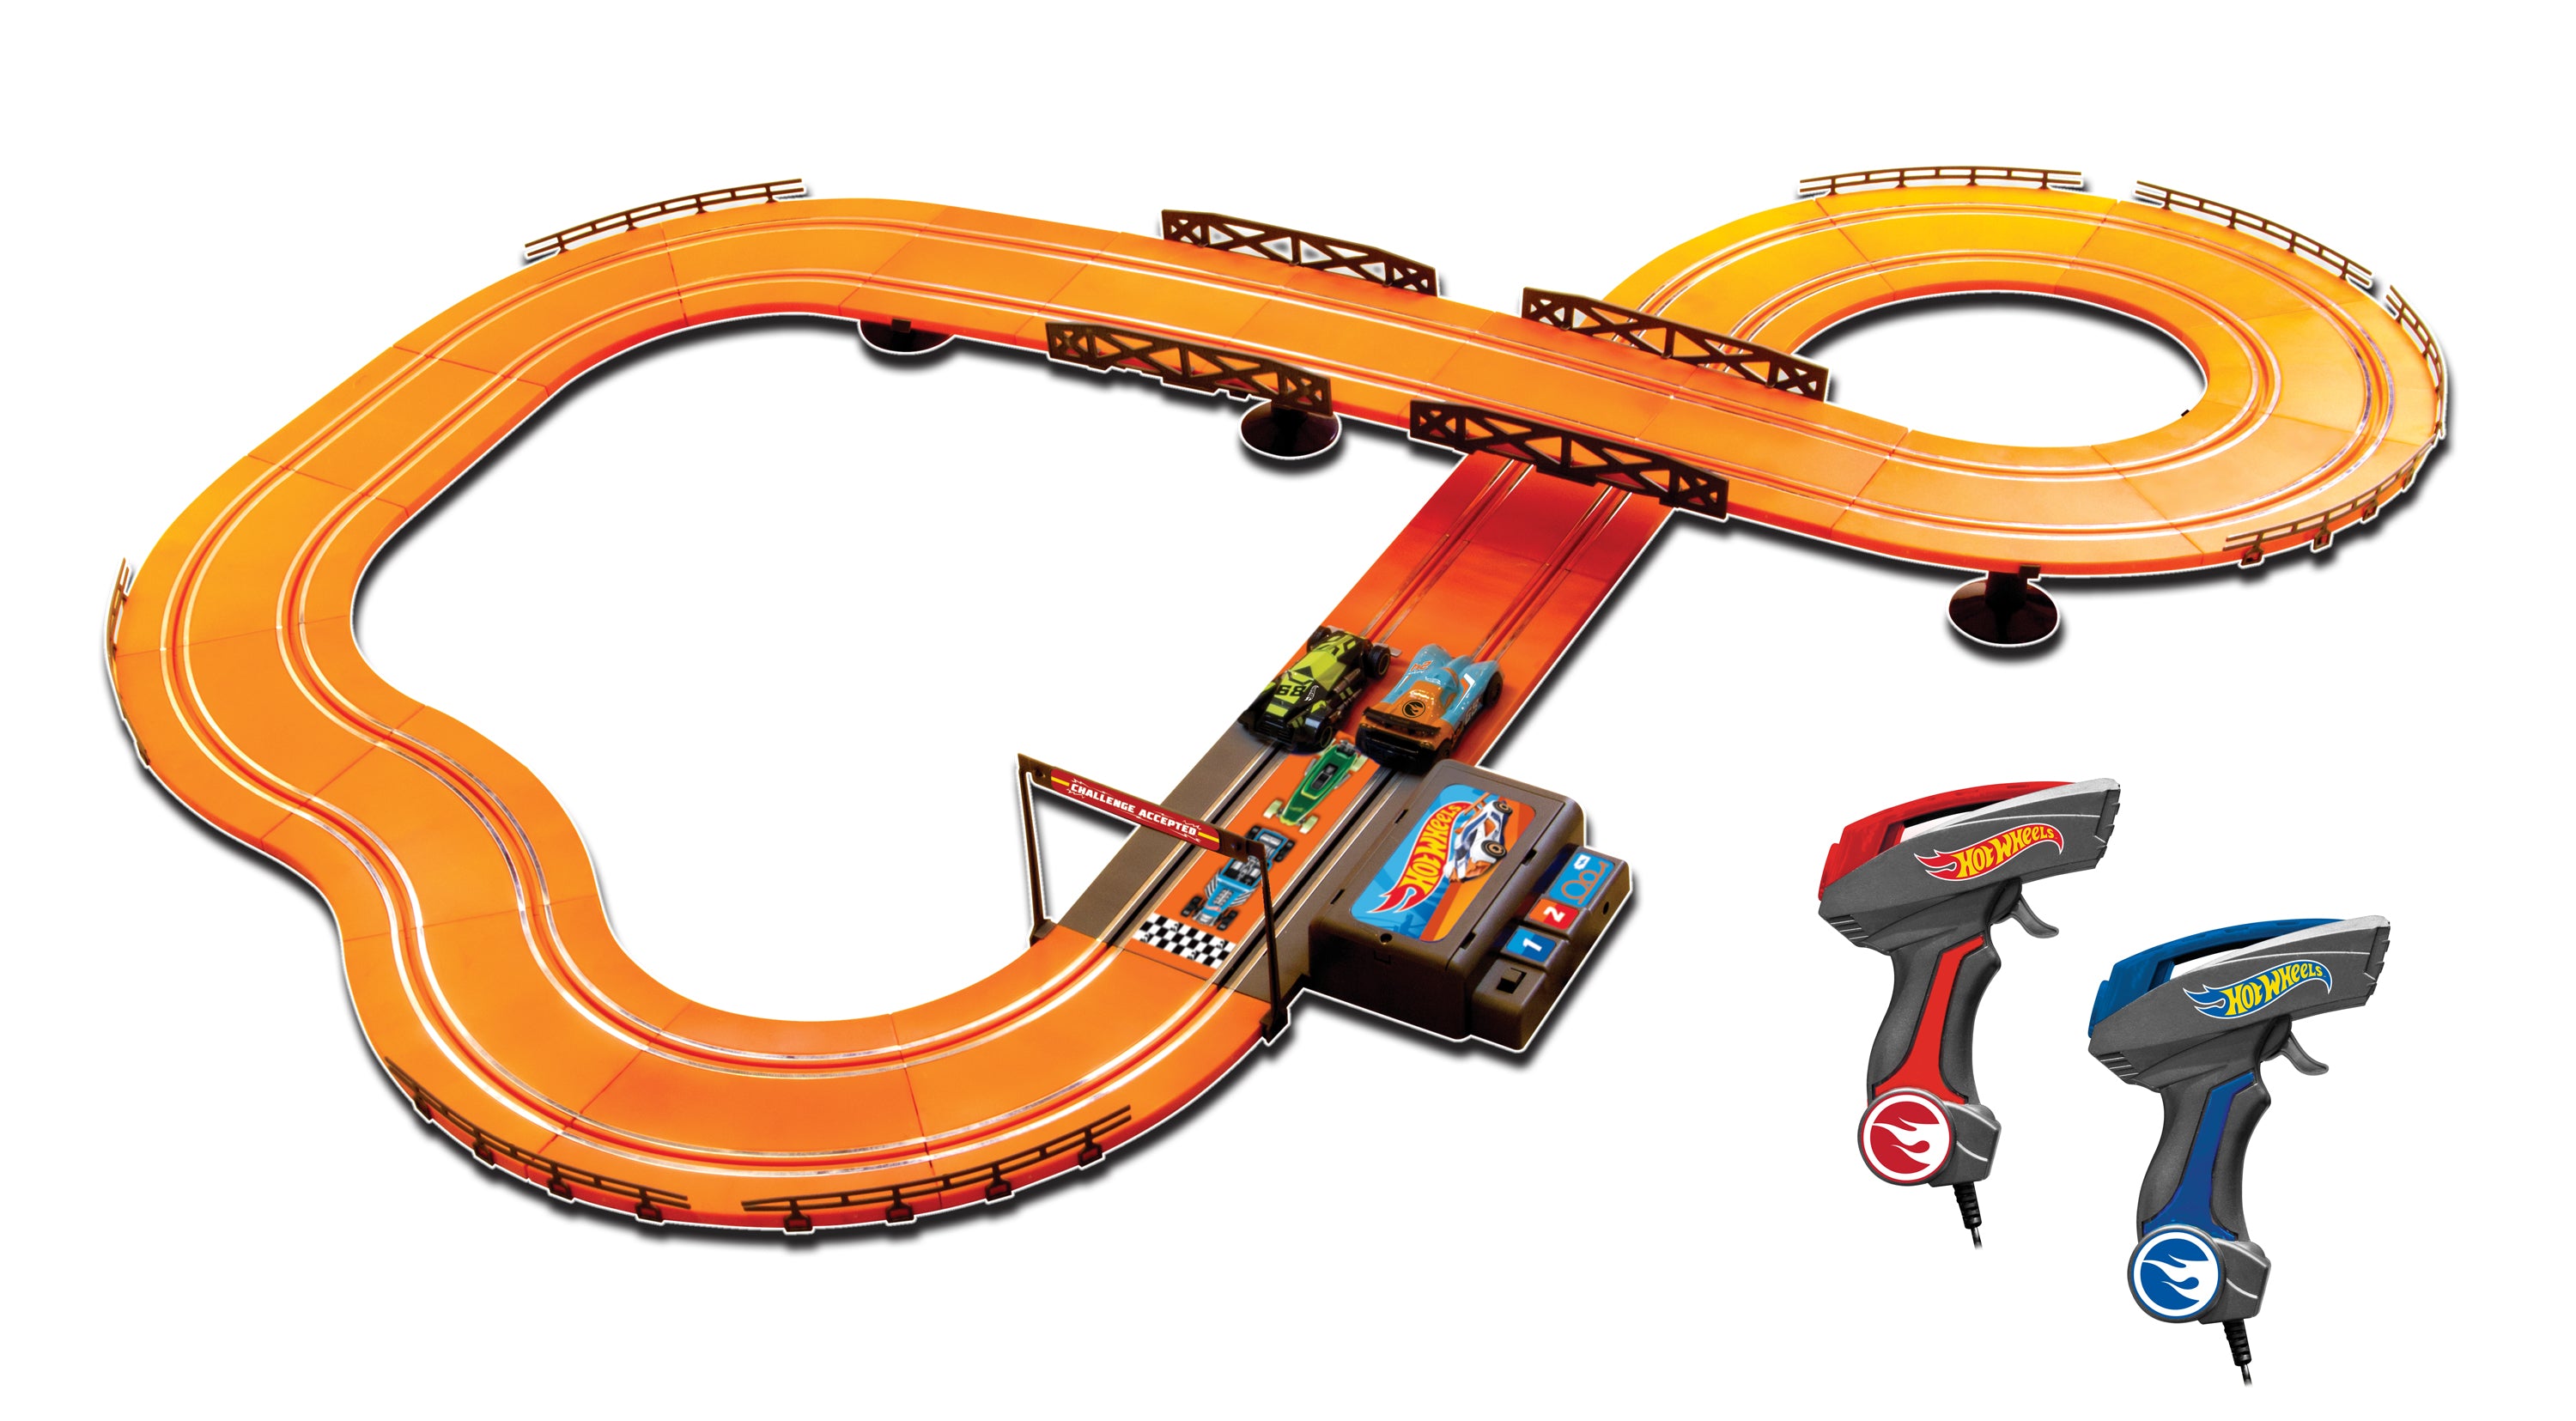 1:43 Hot Wheels Slot Track Set - 12.4 ft (battery operated)